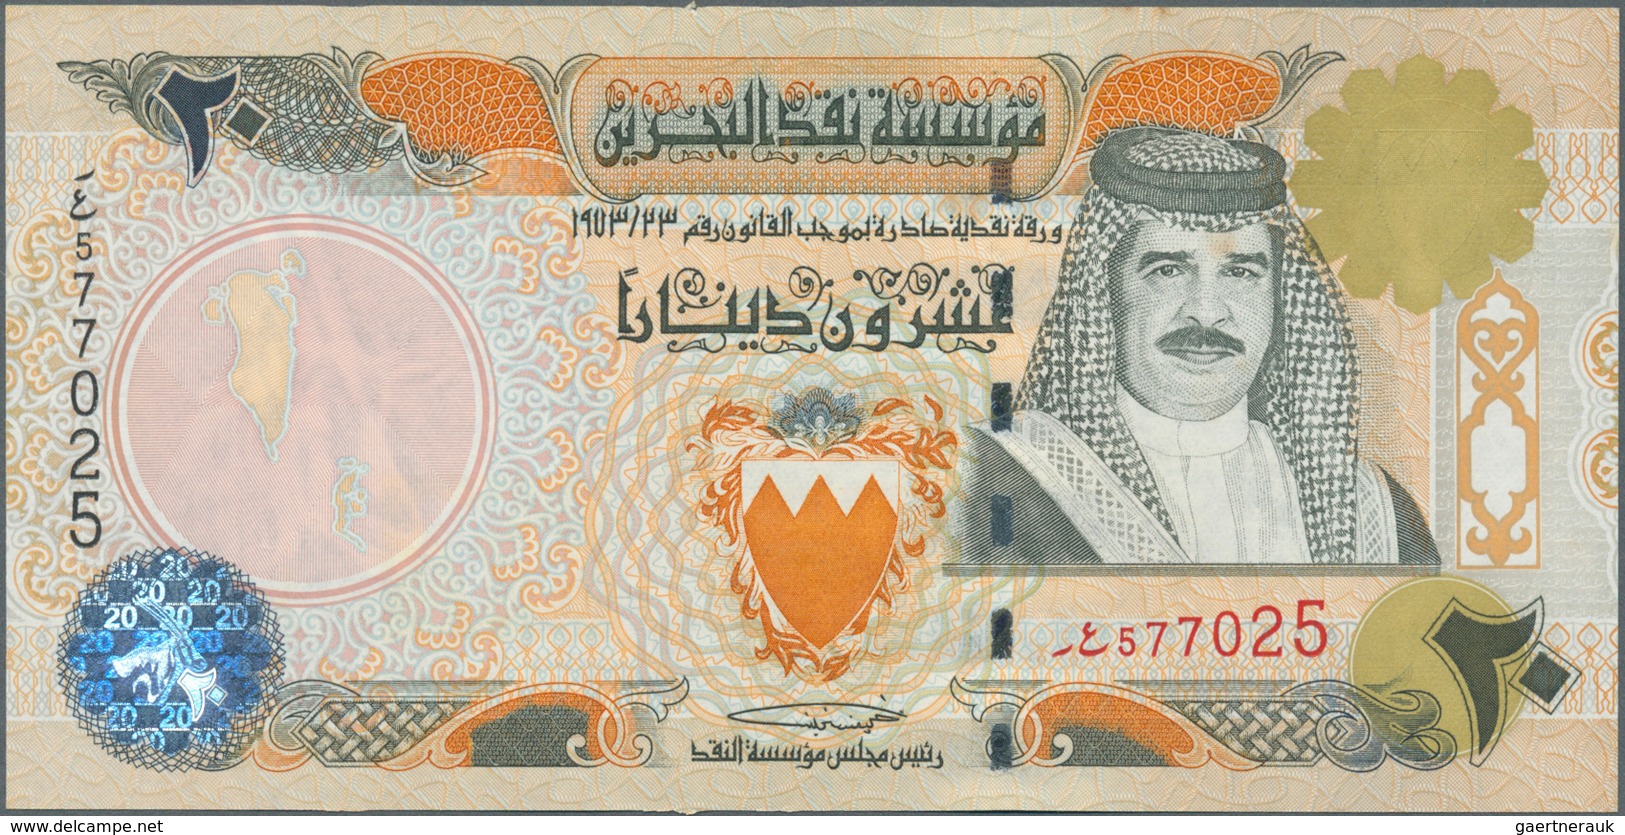 01109 Bahrain: Set Of 2 CONSECUTIVE Banknotes Of 20 Rials ND P. 24 With Serial Numbers #577024 & #577025, - Bahrain